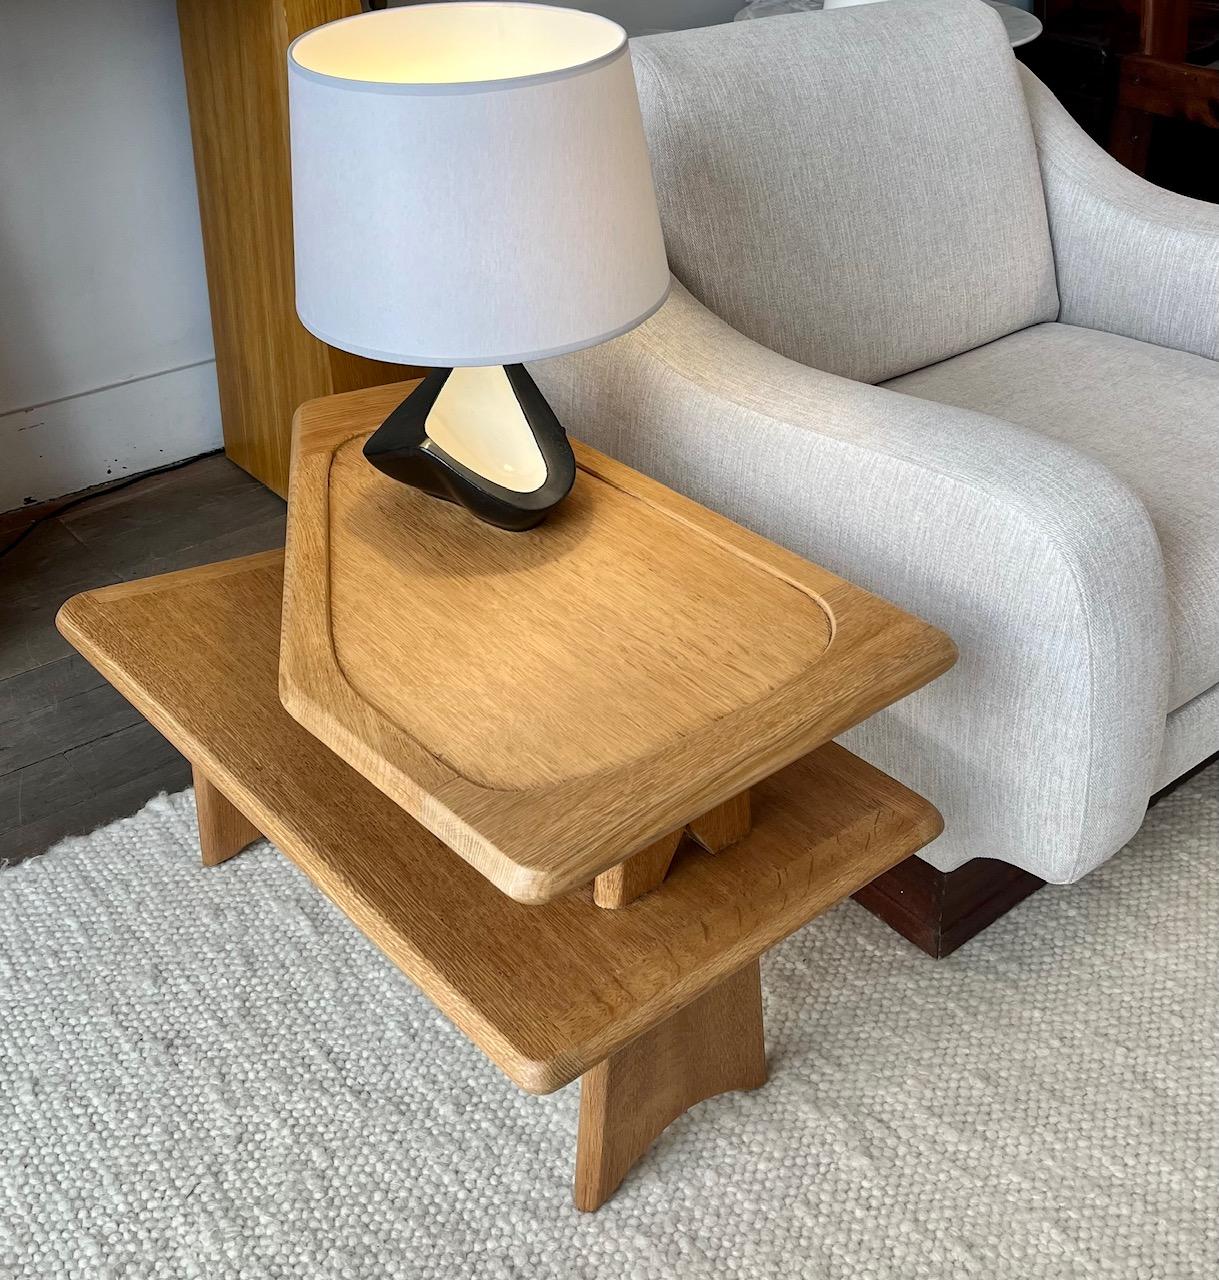 Rare oak end table by Guillerme et Chambron for Votre Maison.
Two tiers resting on wide feet 
Unusual asymmetrical design.
 this light oak piece can serve as an end table or a cocktail table 

France circa 1960 

Dimensions 
L 77 cm ( 30.3